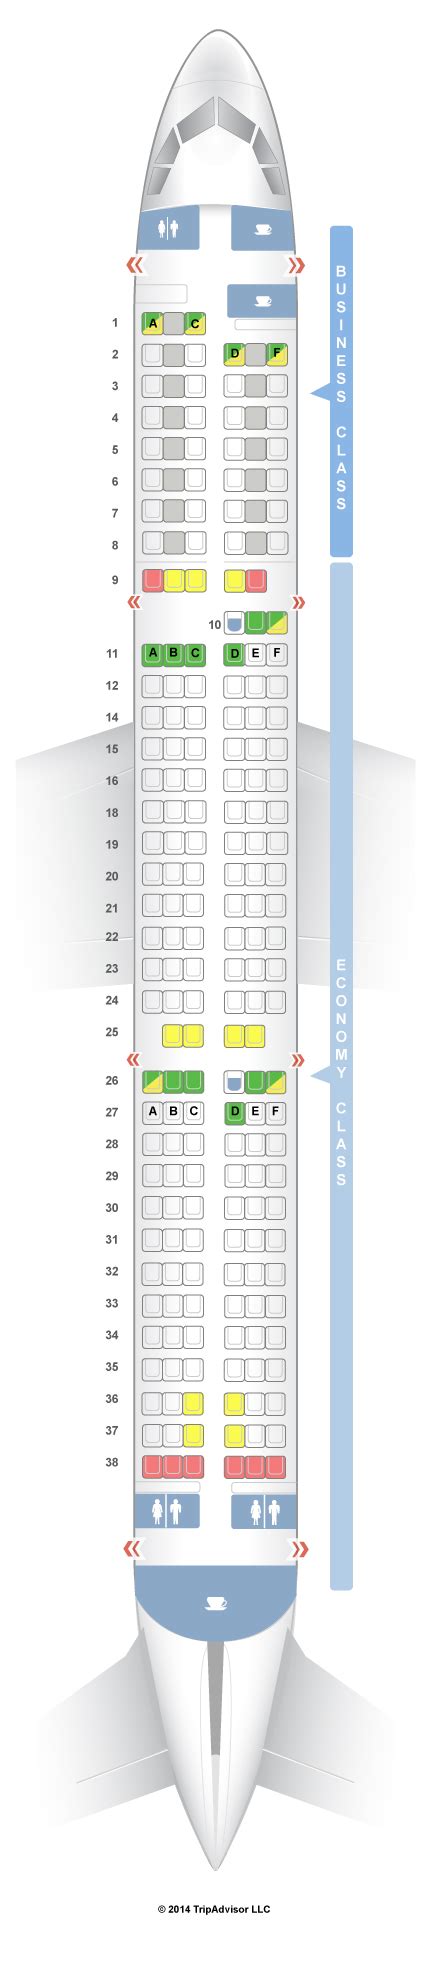 airbus a321 lufthansa seat map Seat map of the Airbus A320Neo